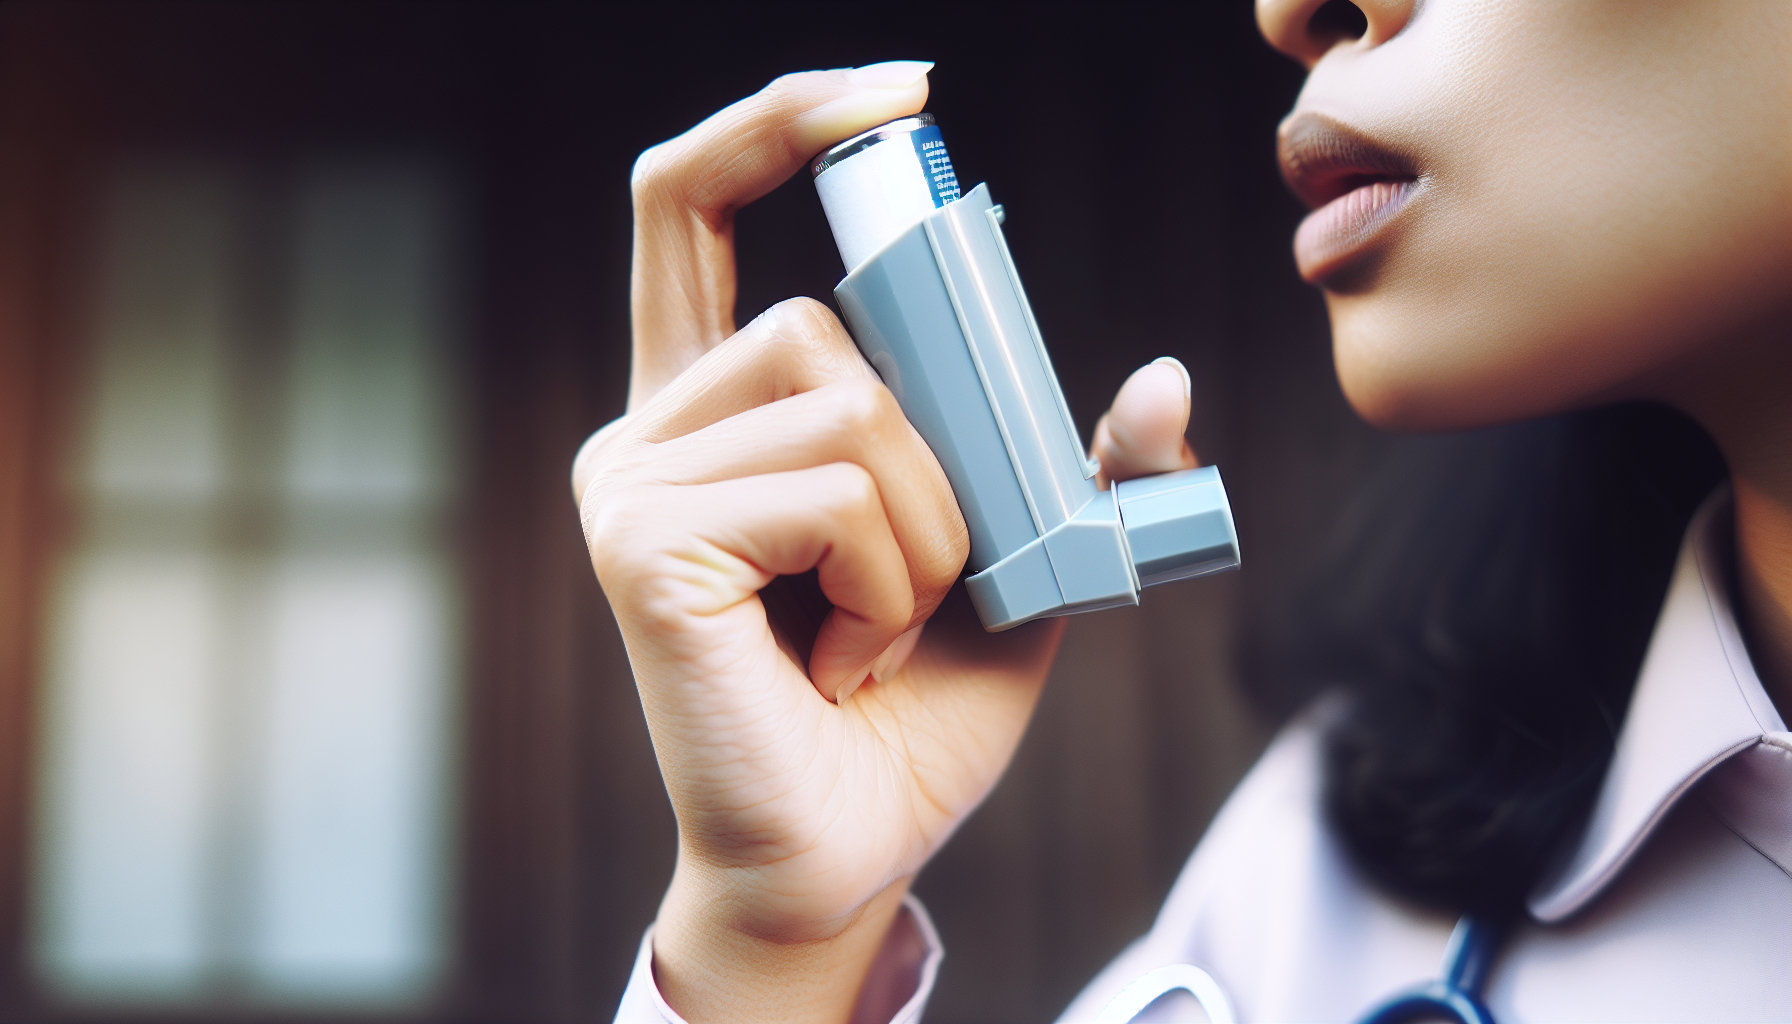 How To Use An Inhaler Correctly For Asthma Management?